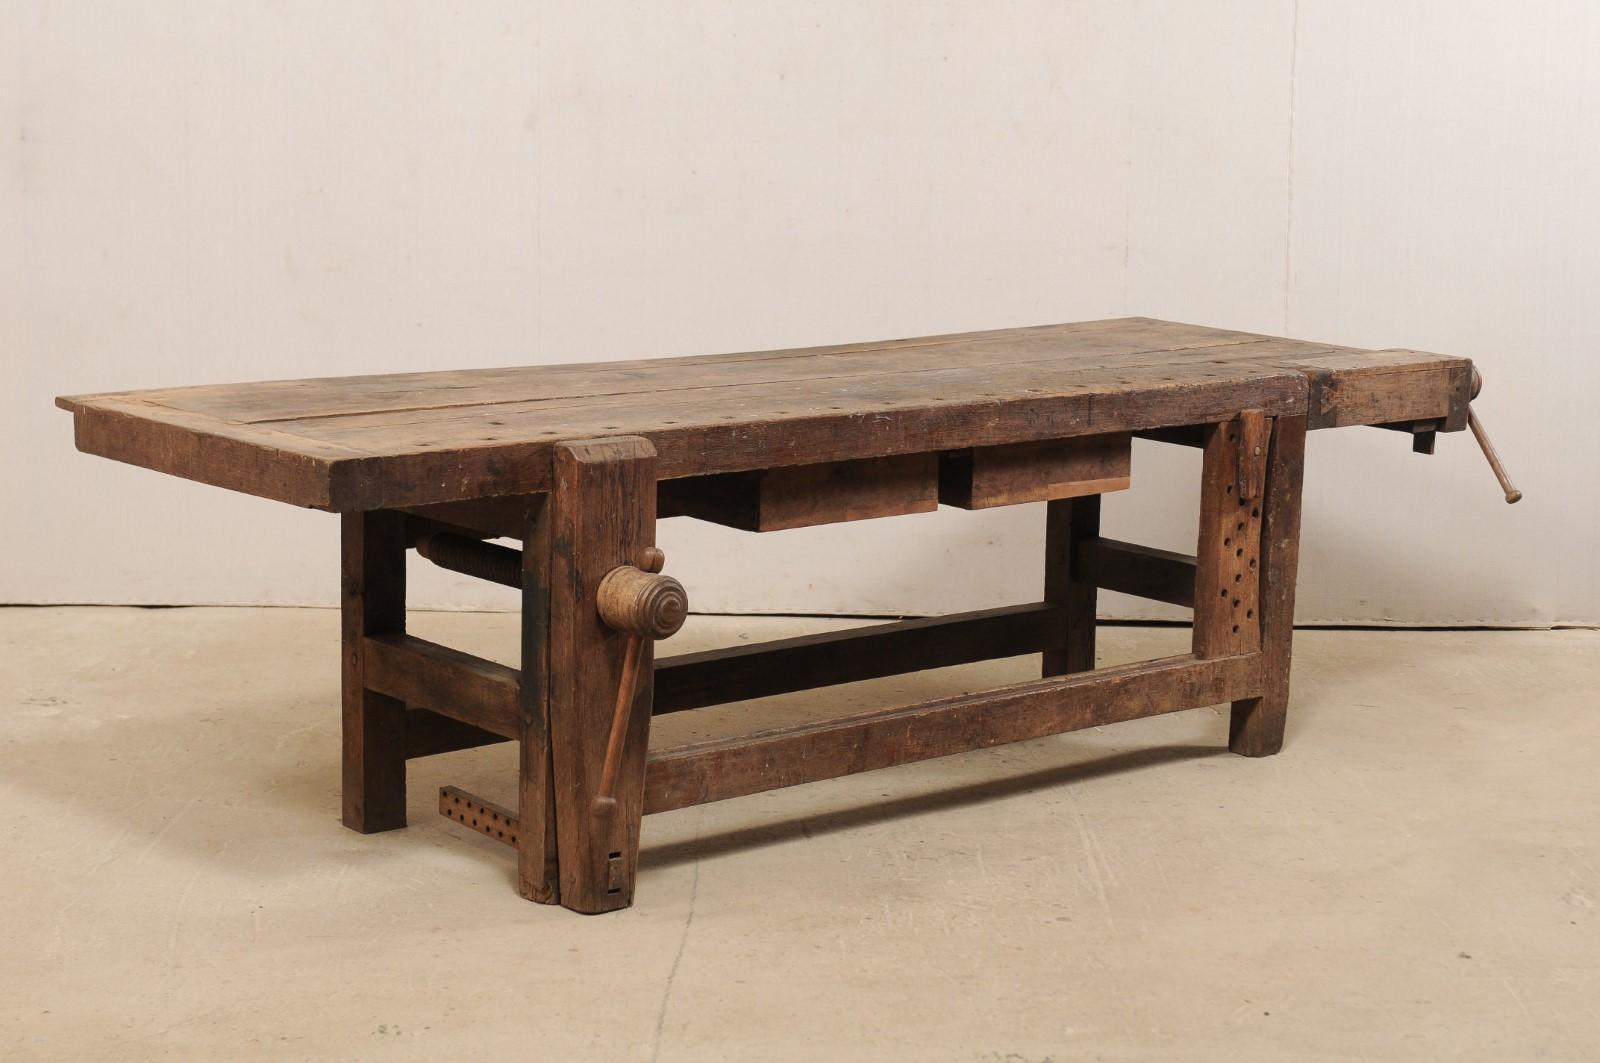 A French 9.5+ ft long work bench table with two drawers from the 19th century. This antique workbench from France has a thick, rectangular-shaped top with large adjustable clamping mechanisms, notched cut-outs with wooden spikes. The apron houses